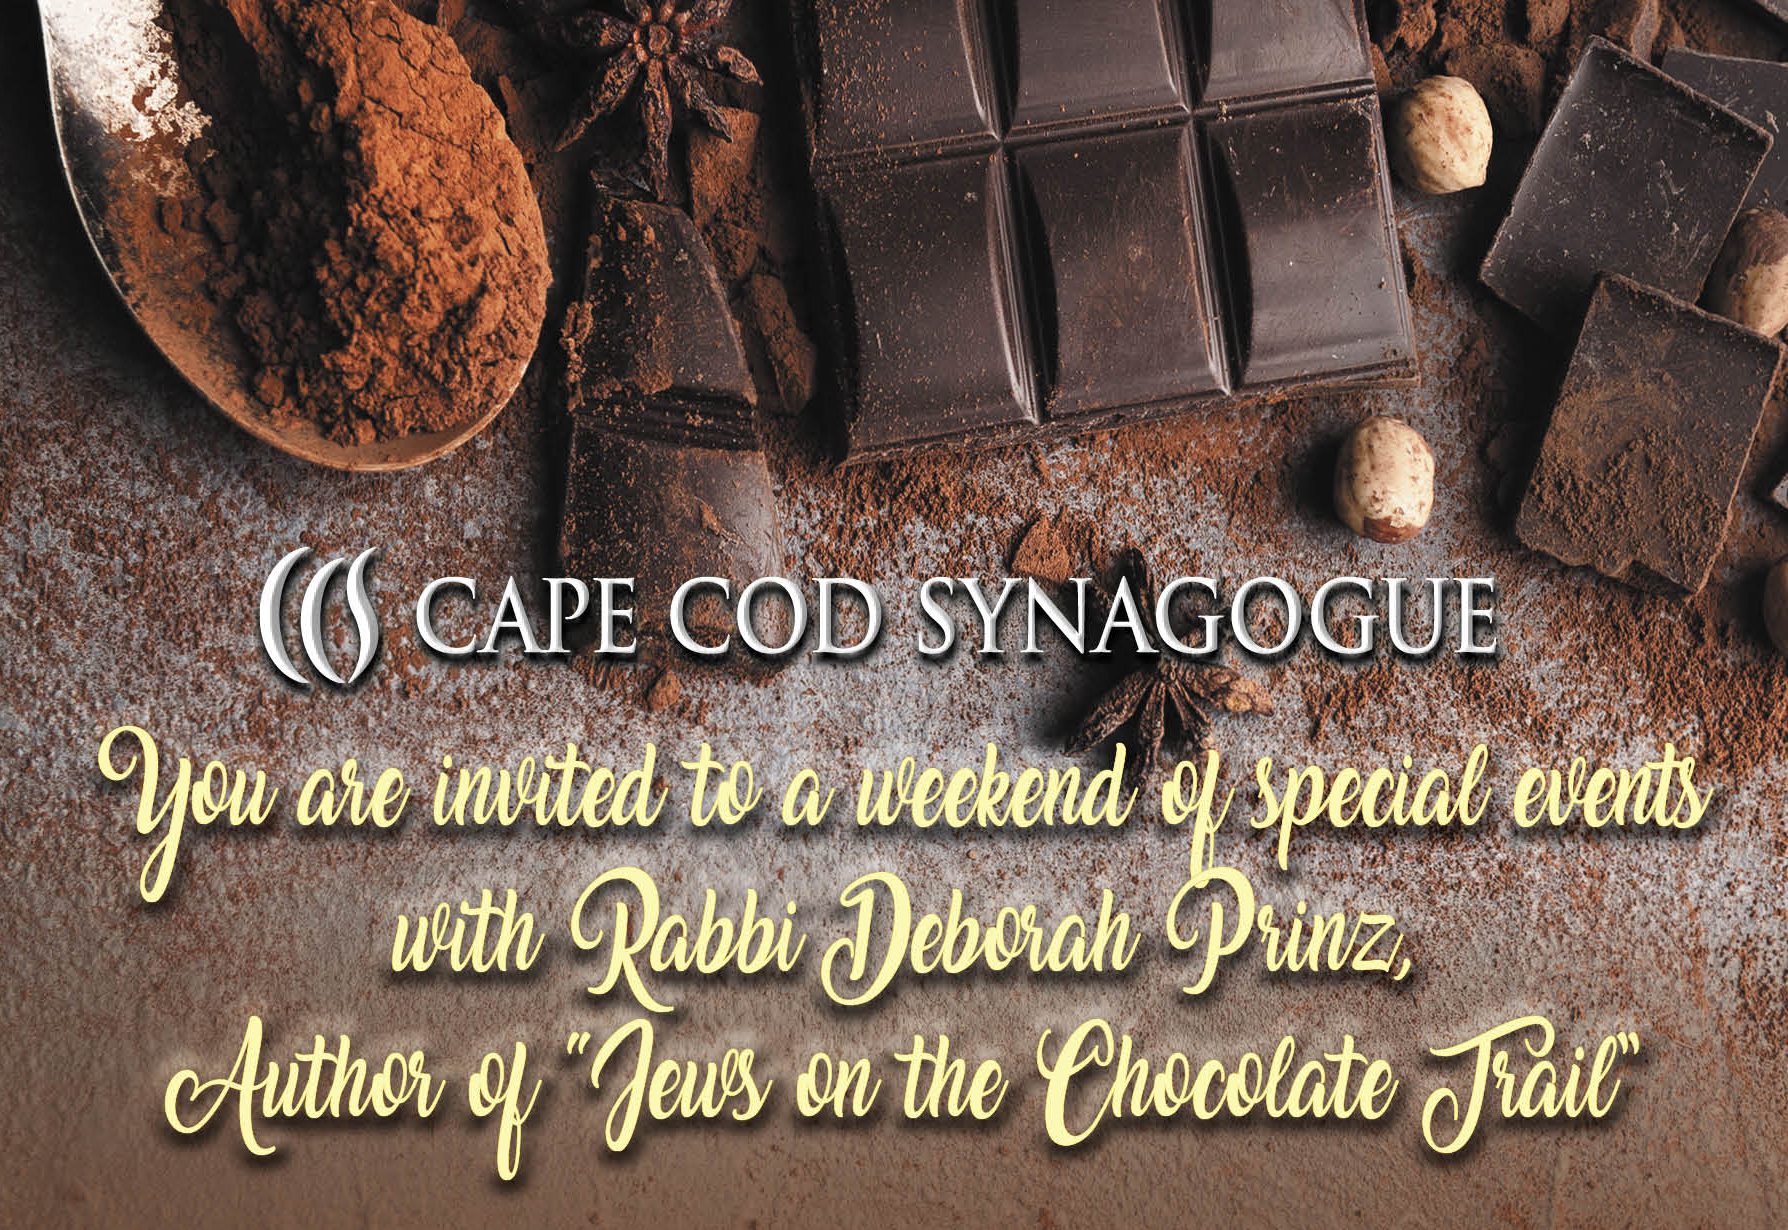 Jews on the Chocolate Trail-A weekend of special events April 3 and 4, 2020